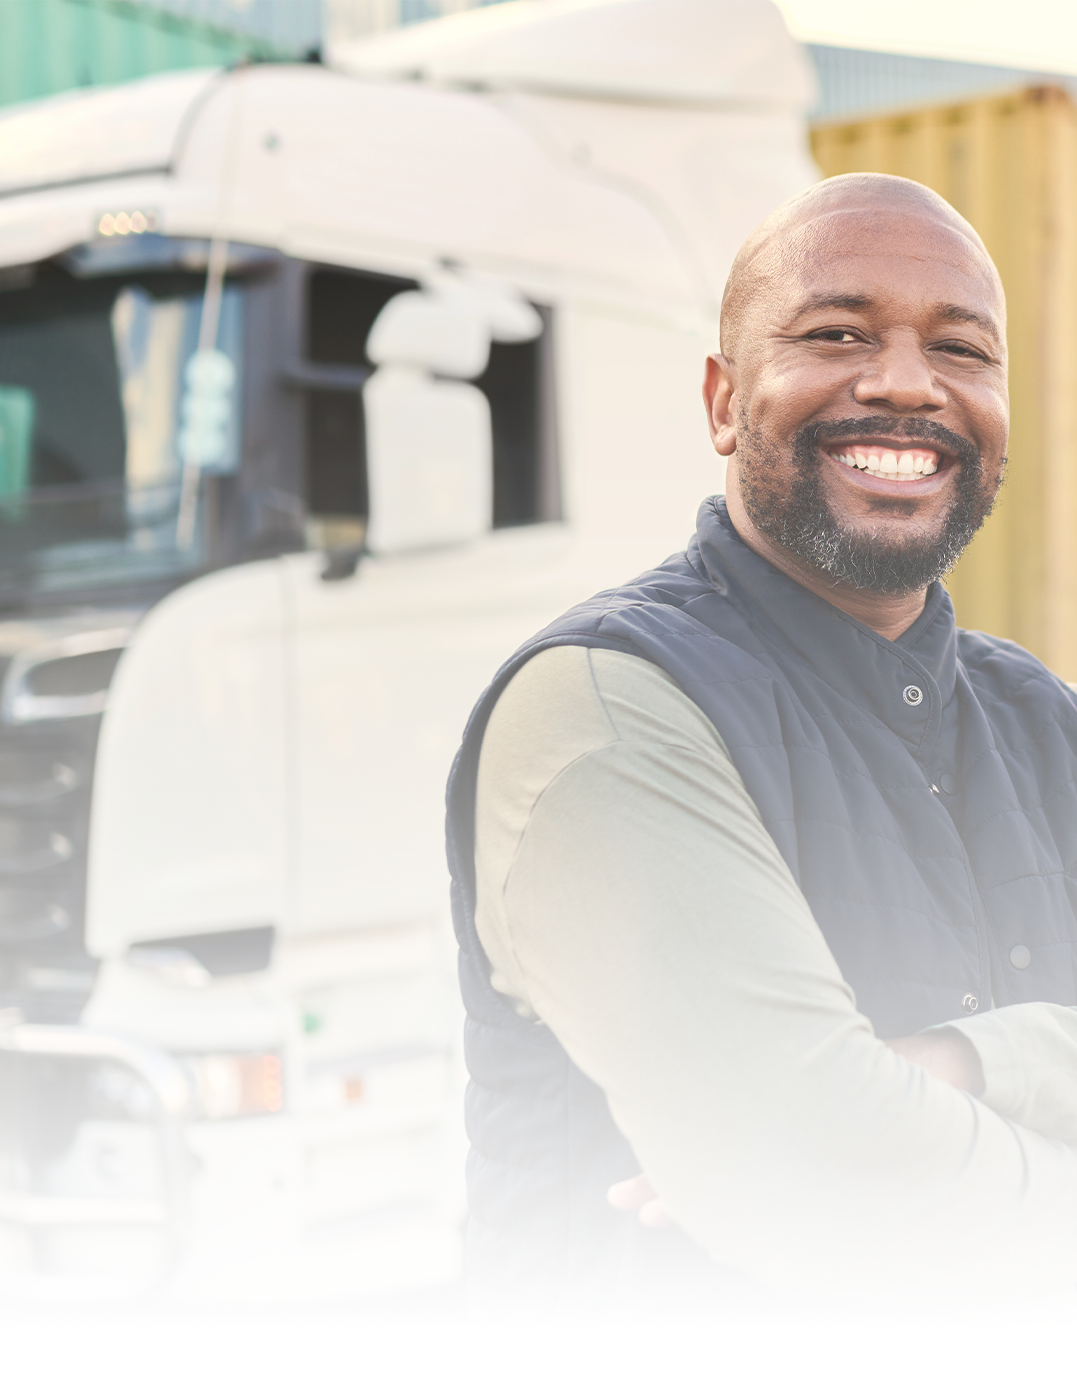 Smiling Bald Older Gentlemen Standing In Front Of A Large Freight Truck